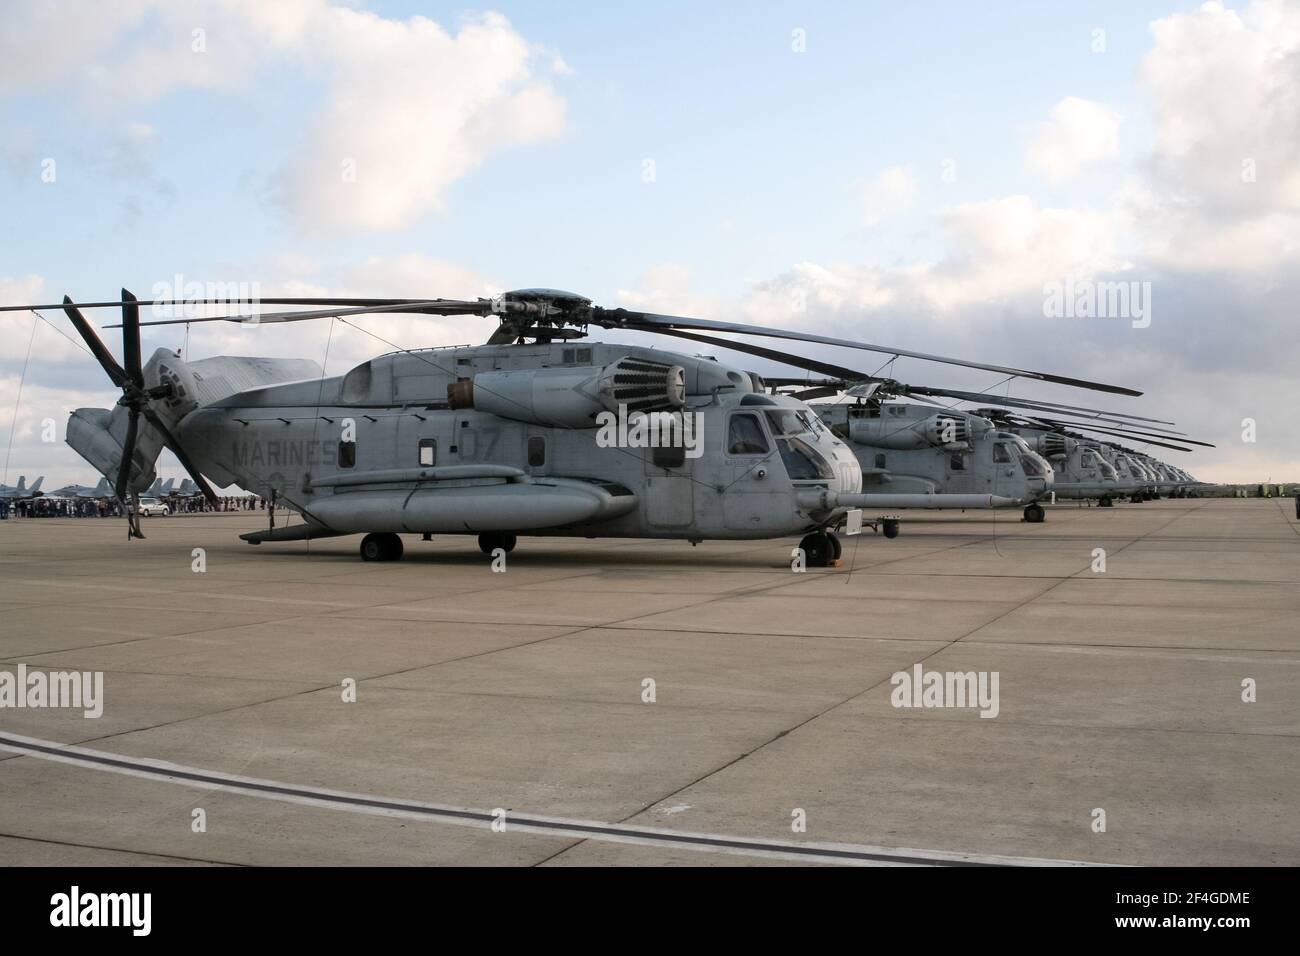 US Marines CH-53E Super Stallion military helicopter on it&#39;s homebase at Miramar Air Station. California, USA - October 15, 2016. Stock Photo